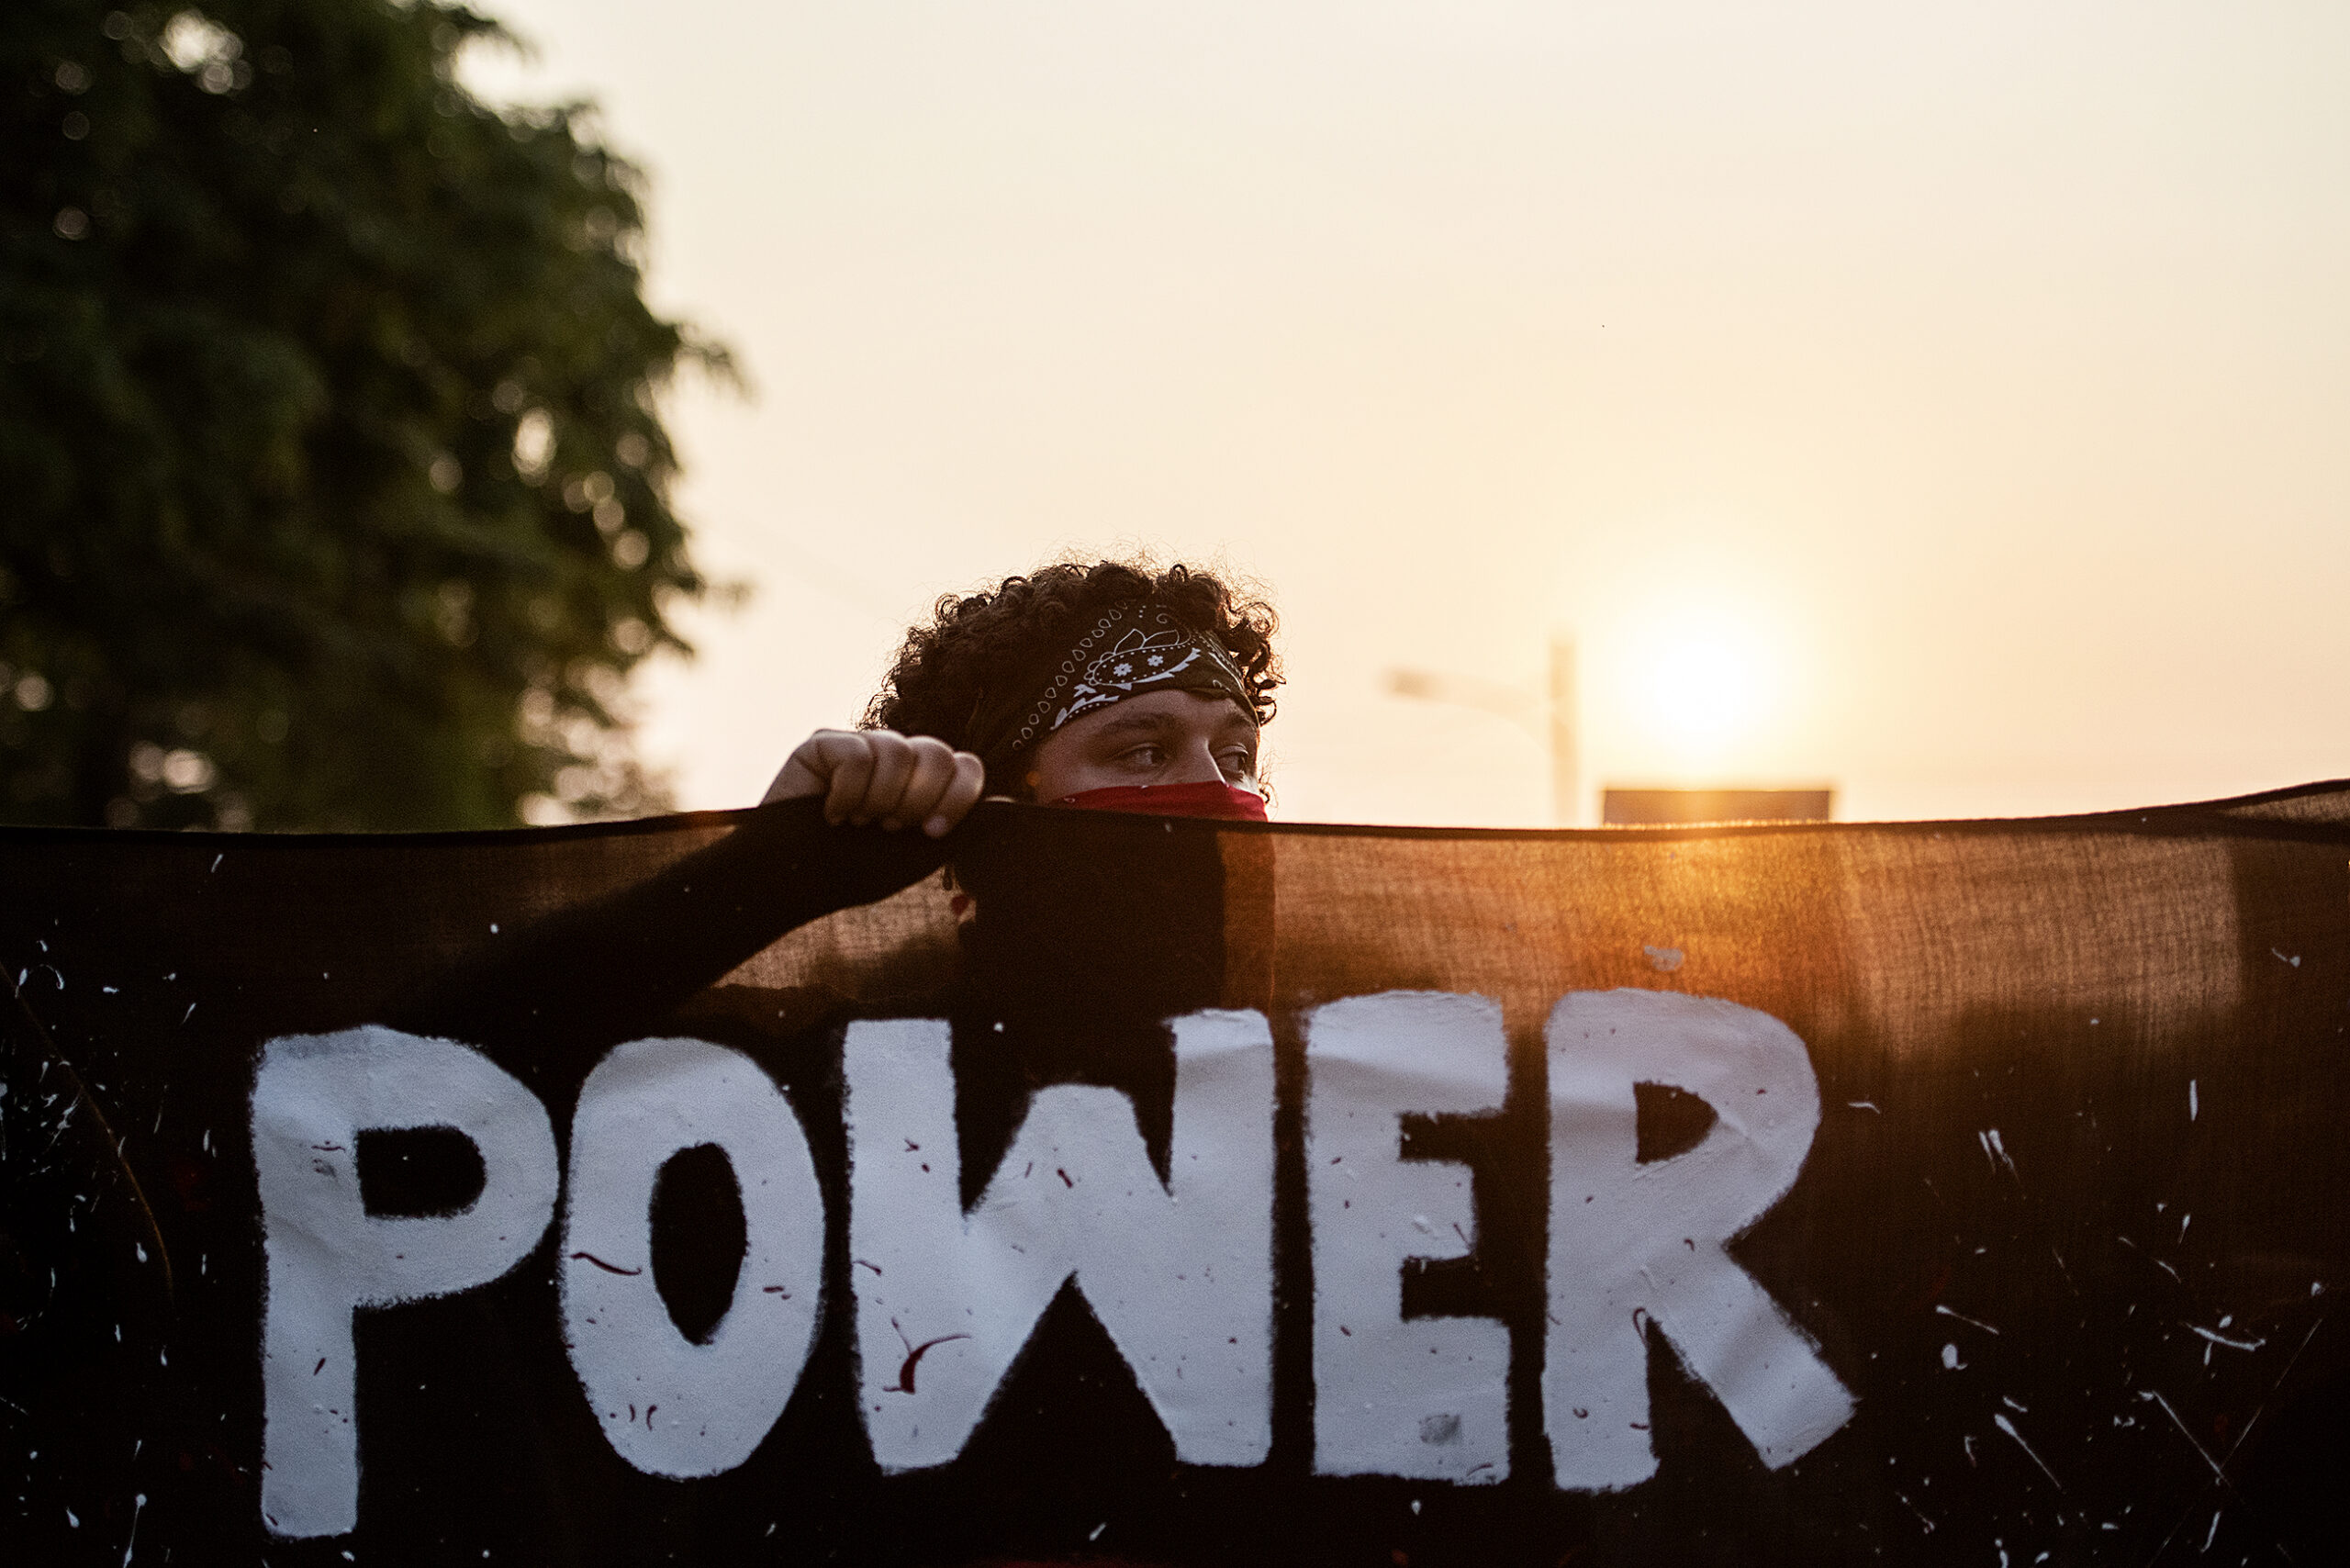 A protester holds a banner with the word "power" as the sun sets behind him